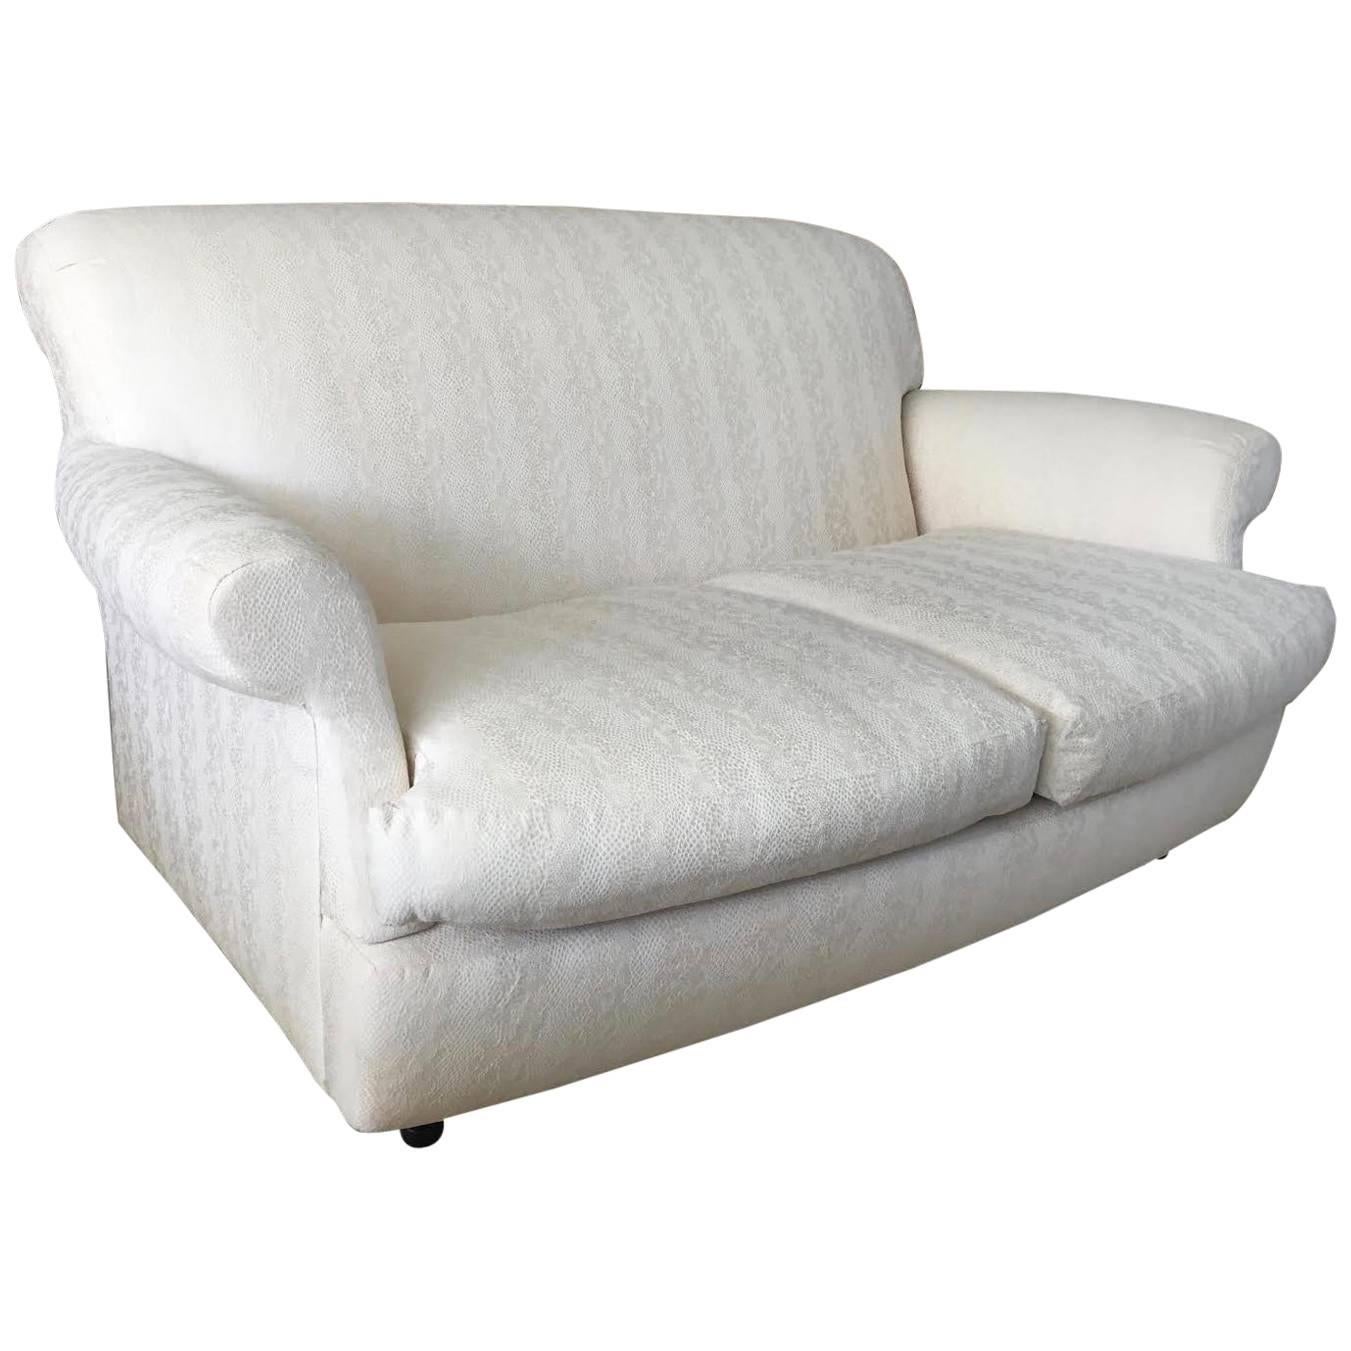 Vintage Palazzetti Loveseat  For Sale